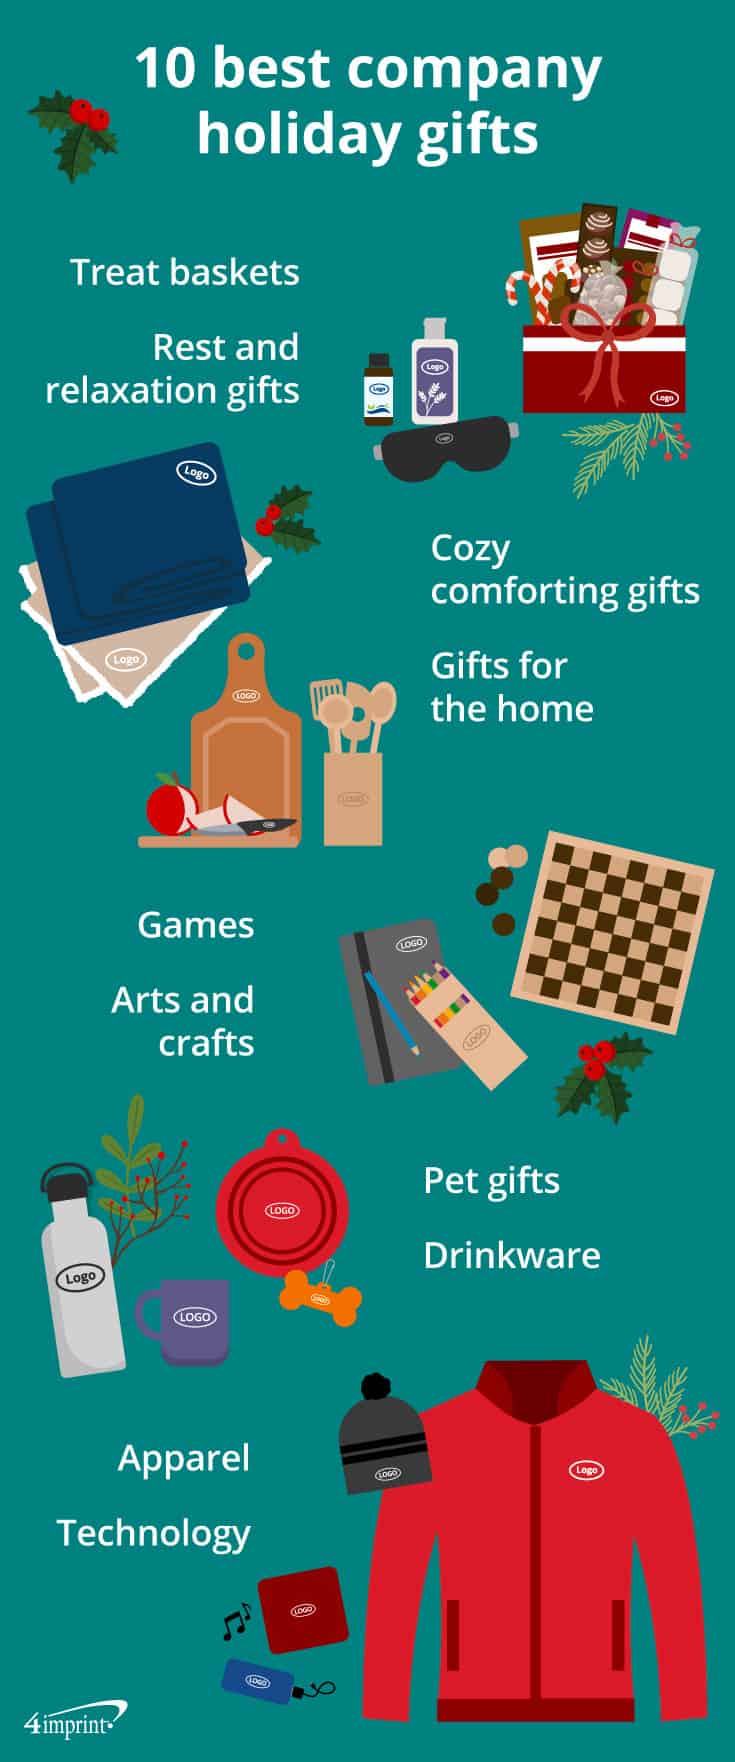 Best Holiday Gifts for Employees